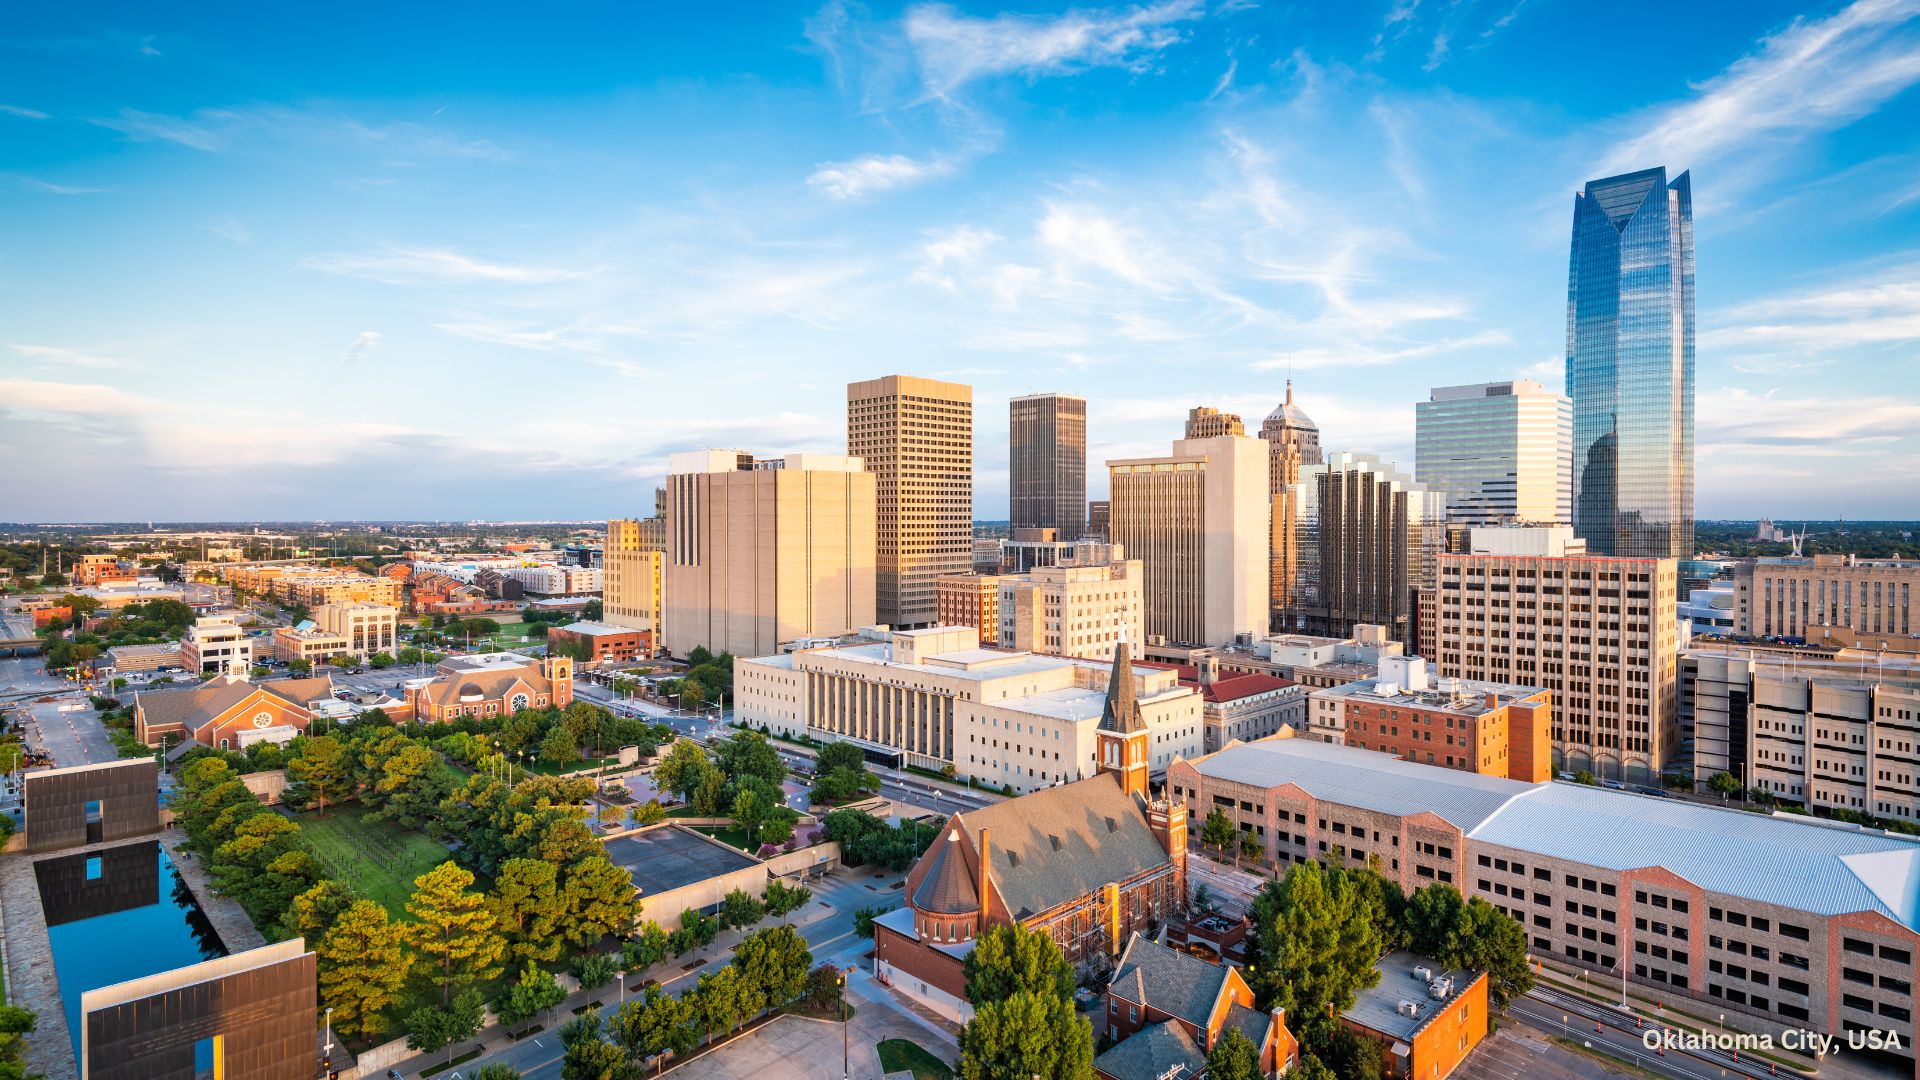 Oklahoma City, USA - 10 Most Affordable Cities in the World for Housing